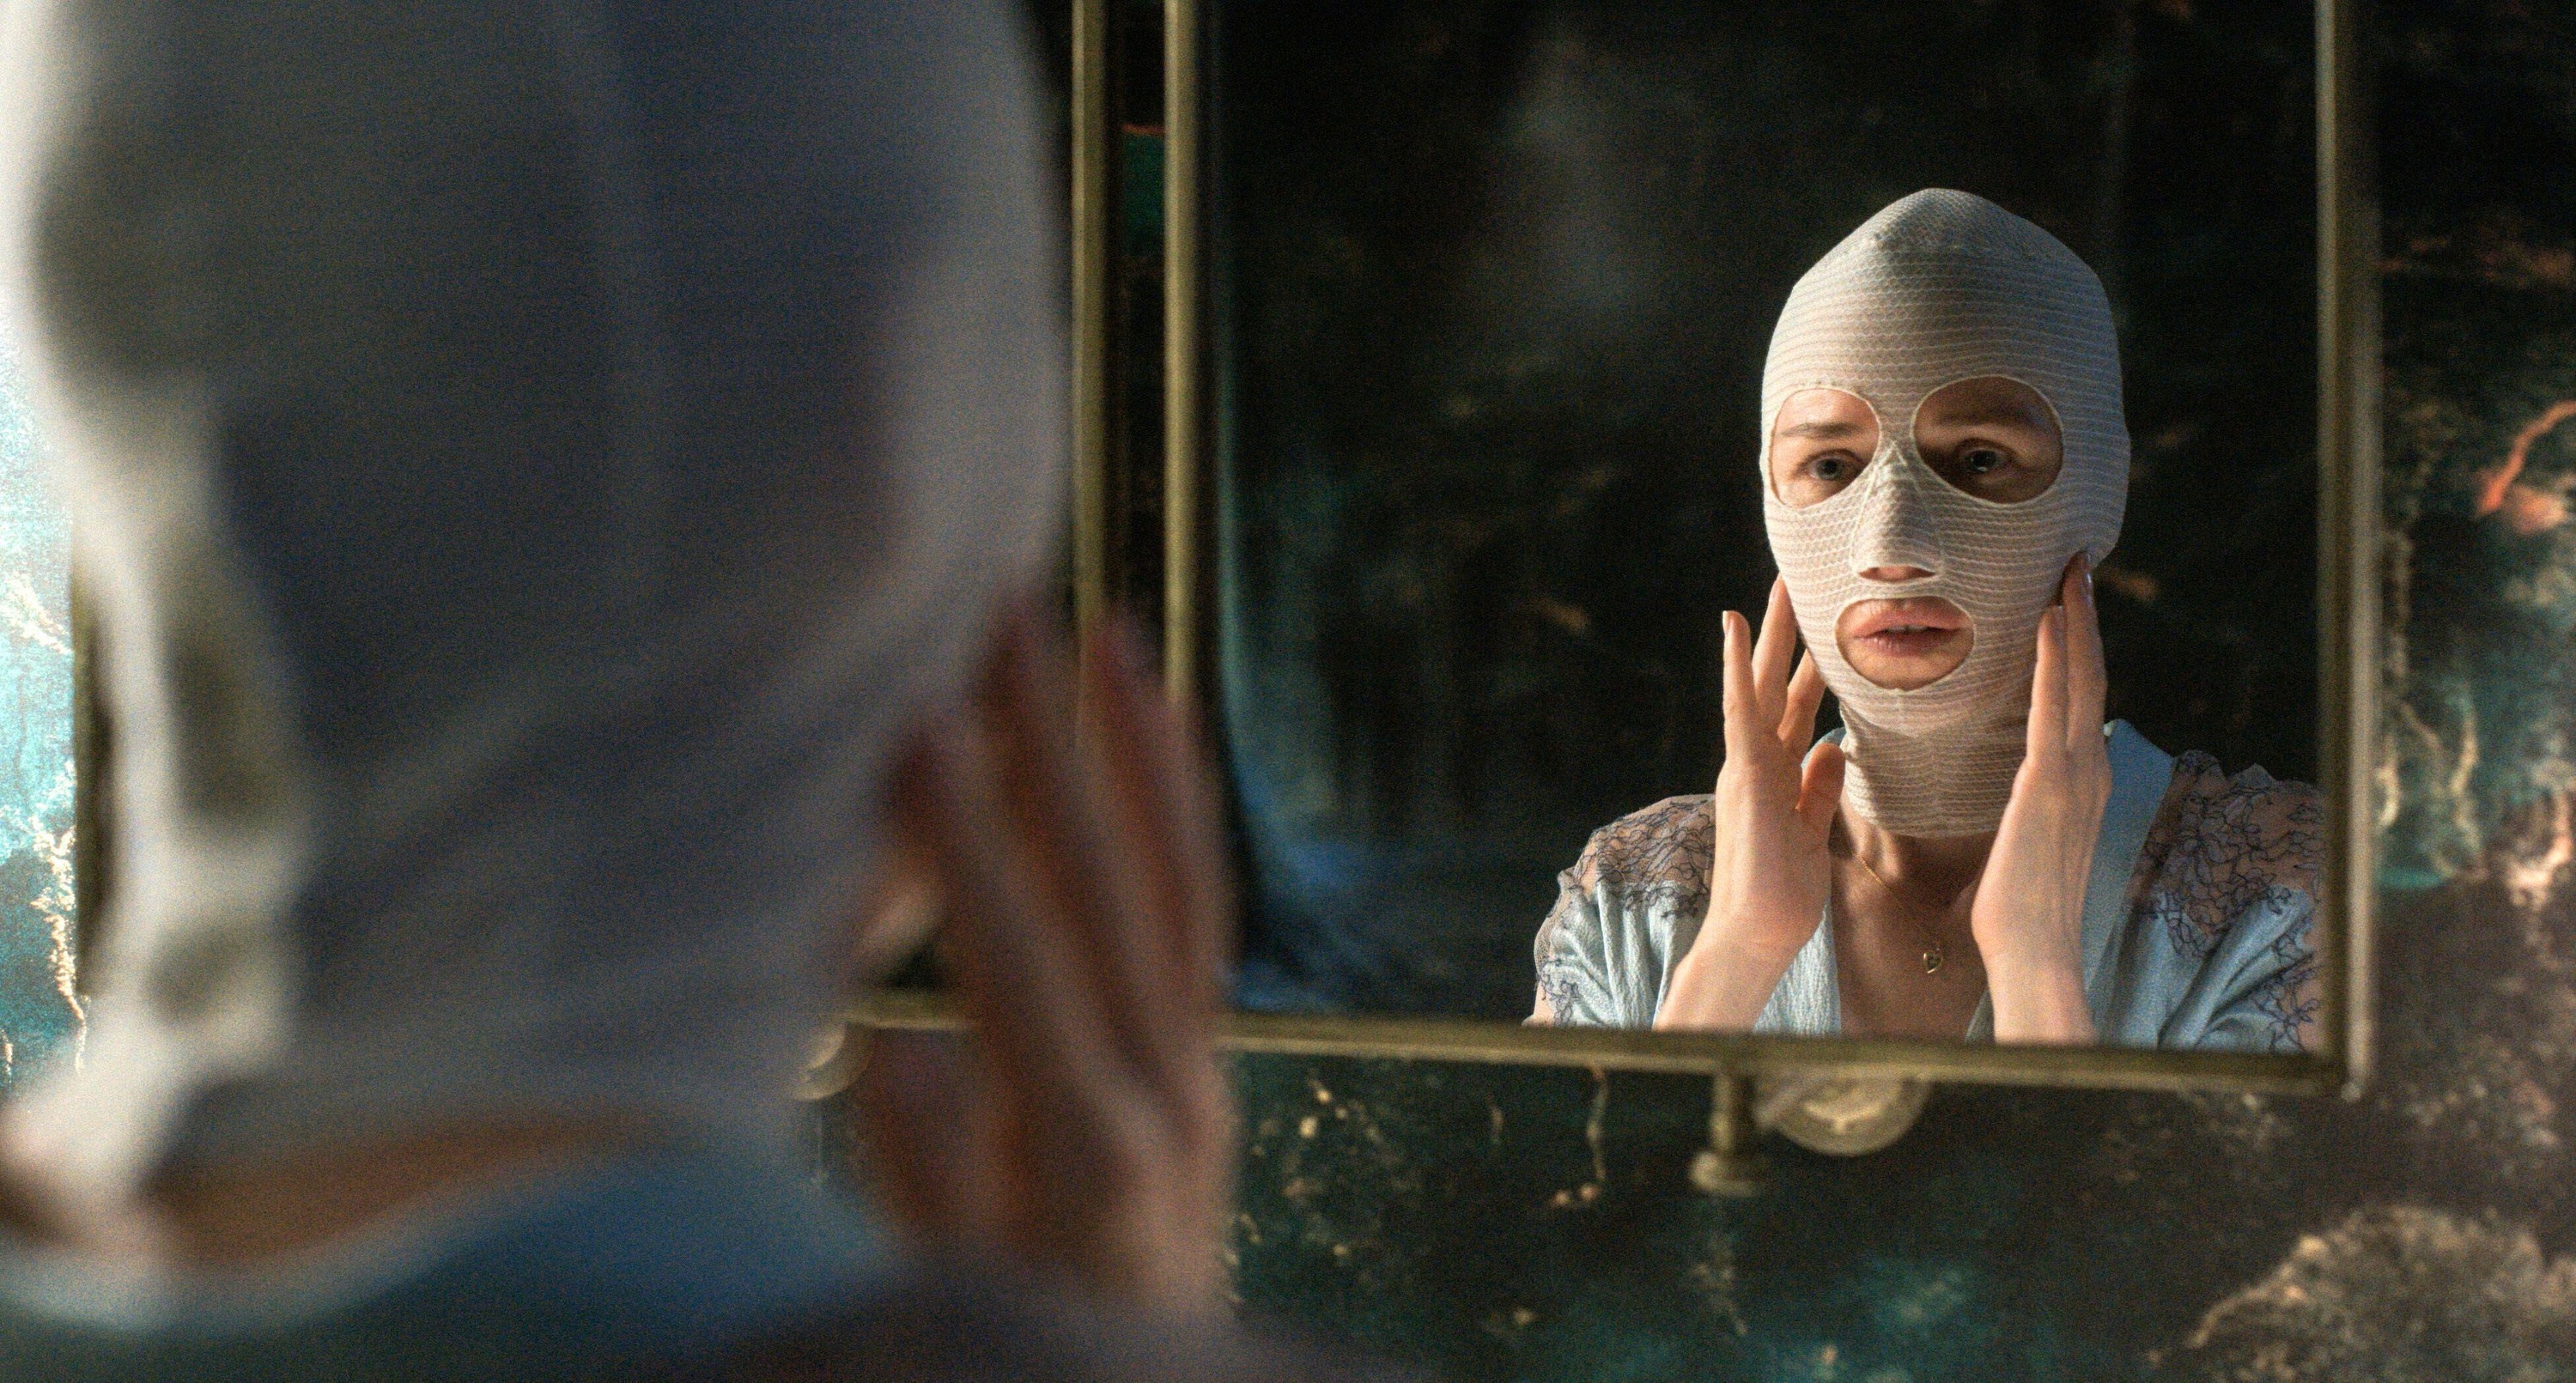 A woman rebuilding her face examines her mask in the mirror in “Goodnight Mommy”